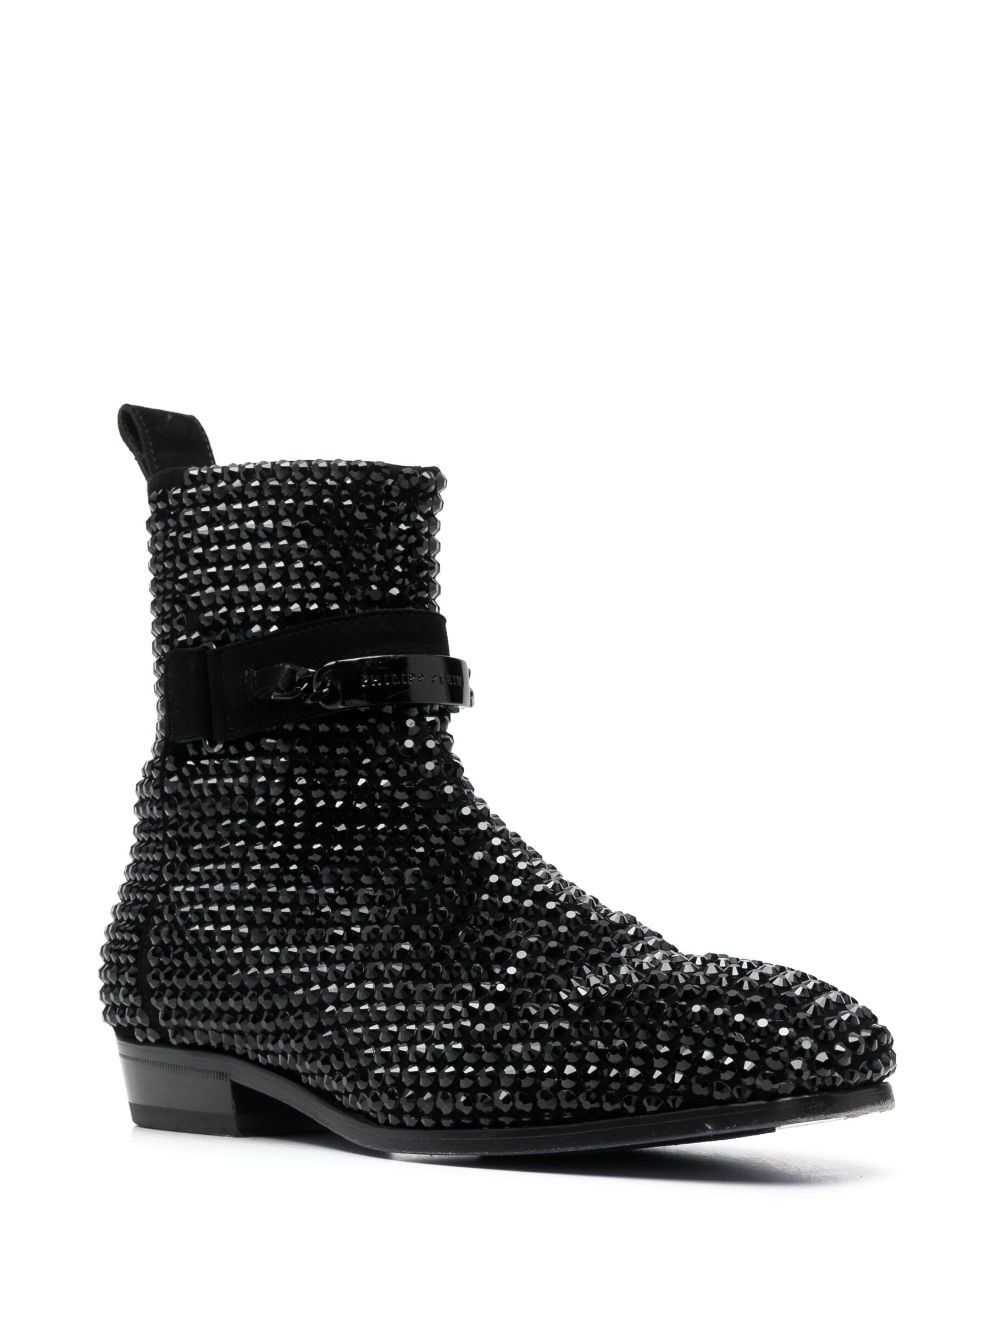 Image 2 of Philipp Plein crystal-embellished suede boots